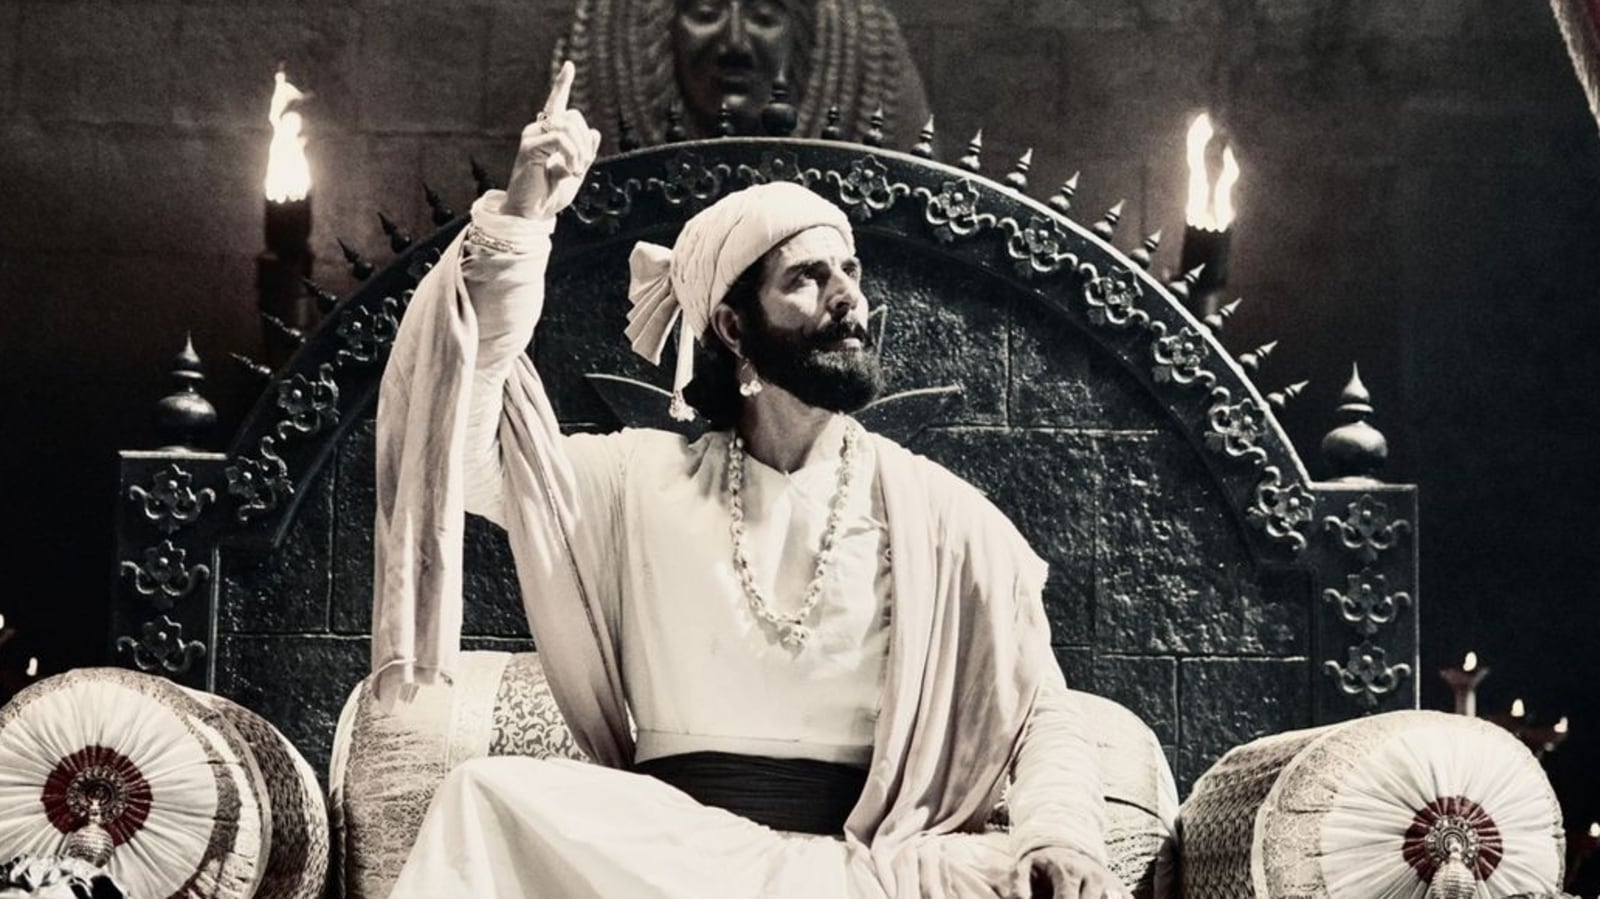 Amazing Collection of Authentic Shivaji Maharaj Images in Full 4K Resolution – Over 999+ to Choose From